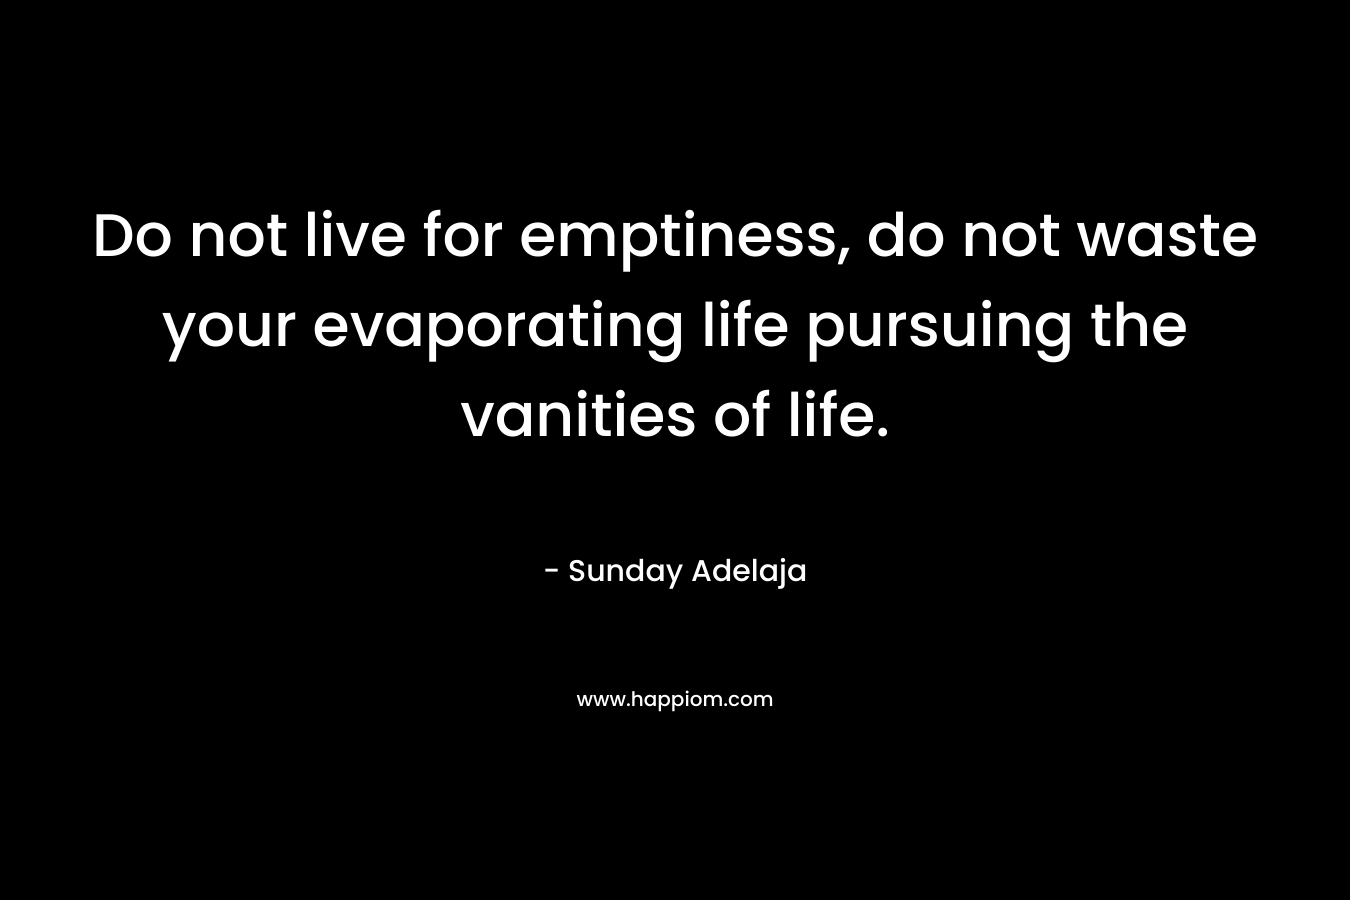 Do not live for emptiness, do not waste your evaporating life pursuing the vanities of life. – Sunday Adelaja